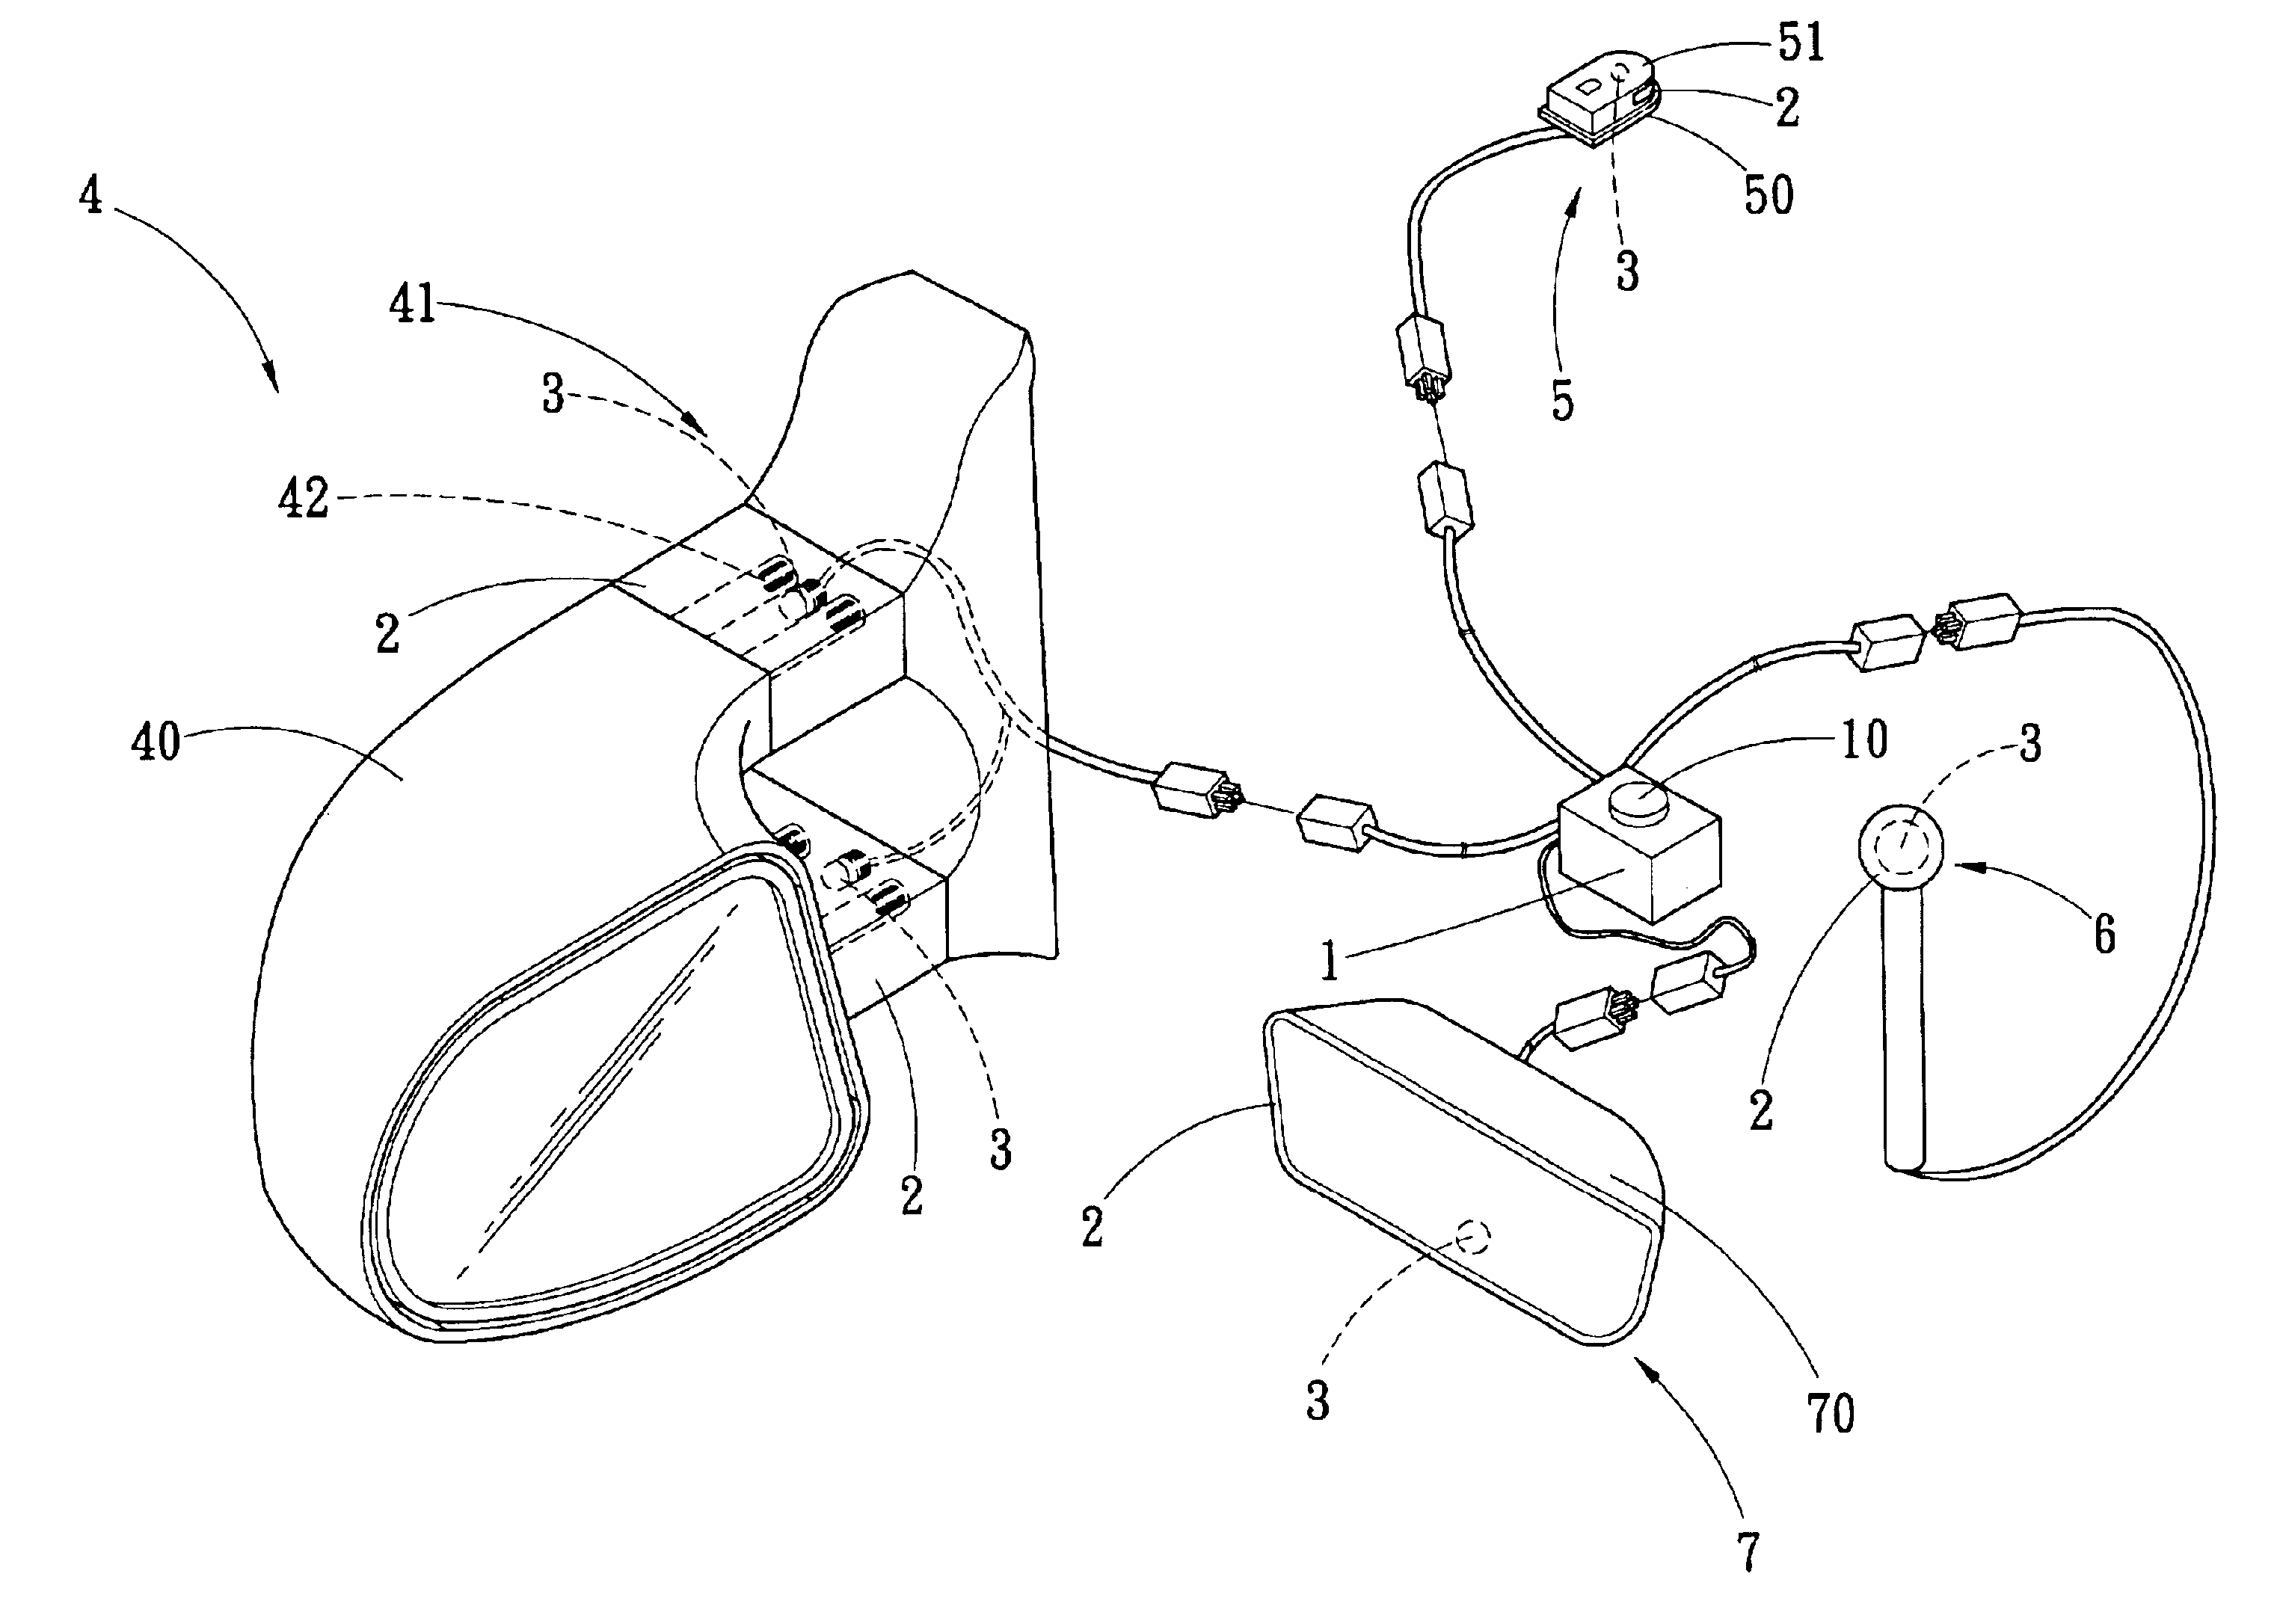 Color-changing illumination assembly for vehicle accessory